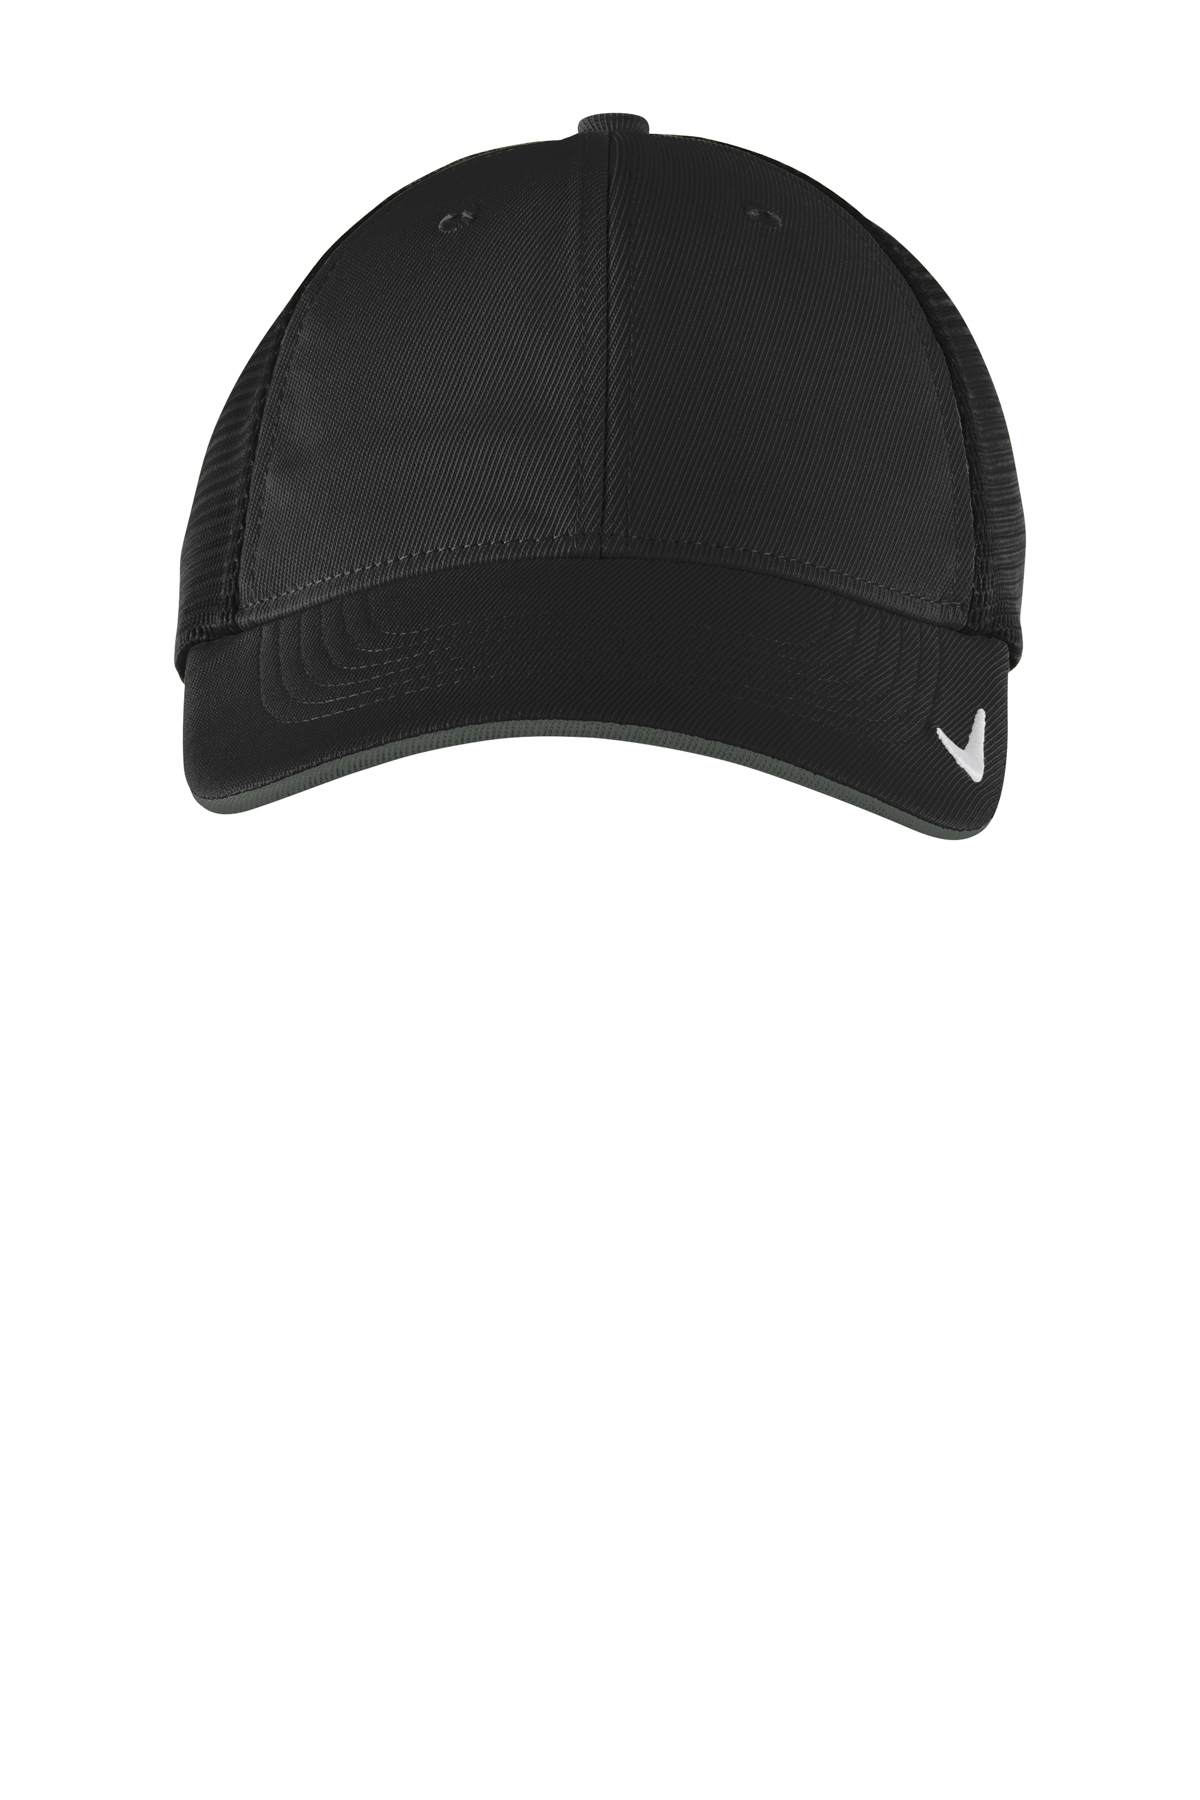 Nike Stretch-to-Fit Mesh Back Cap | Product | SanMar